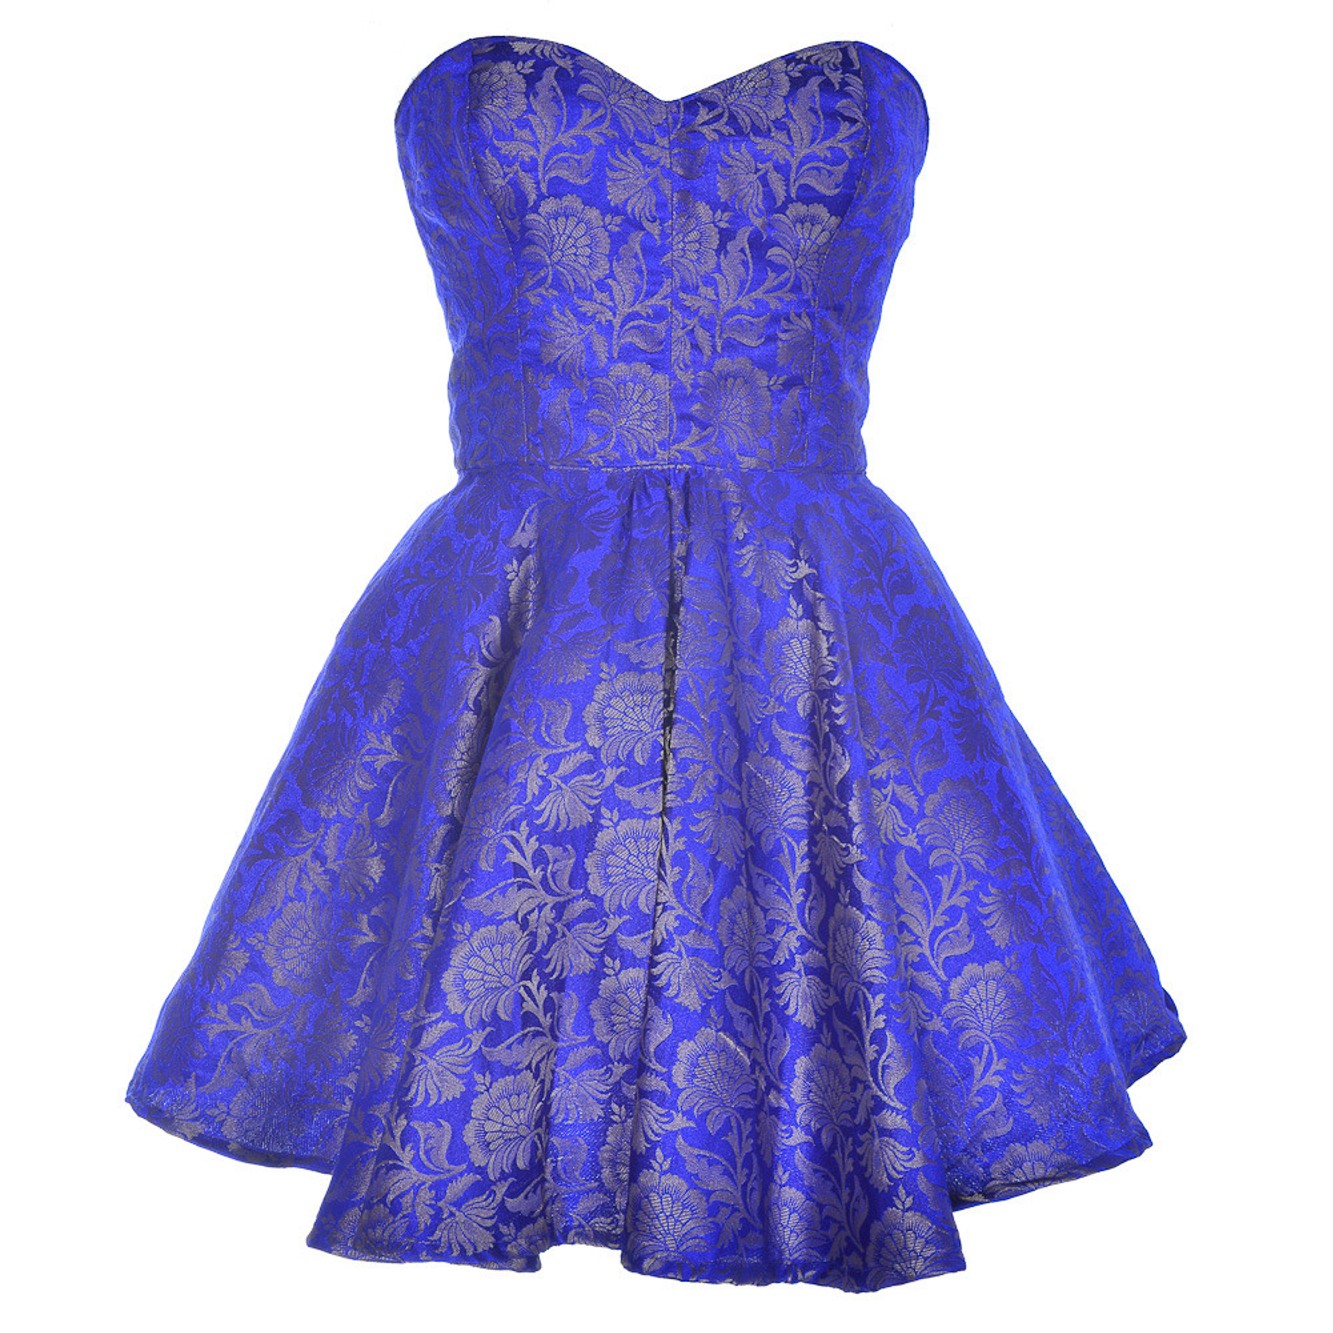 Size 5 Women’s Blue Dress | Gifts for Kids and for the Young at Heart!